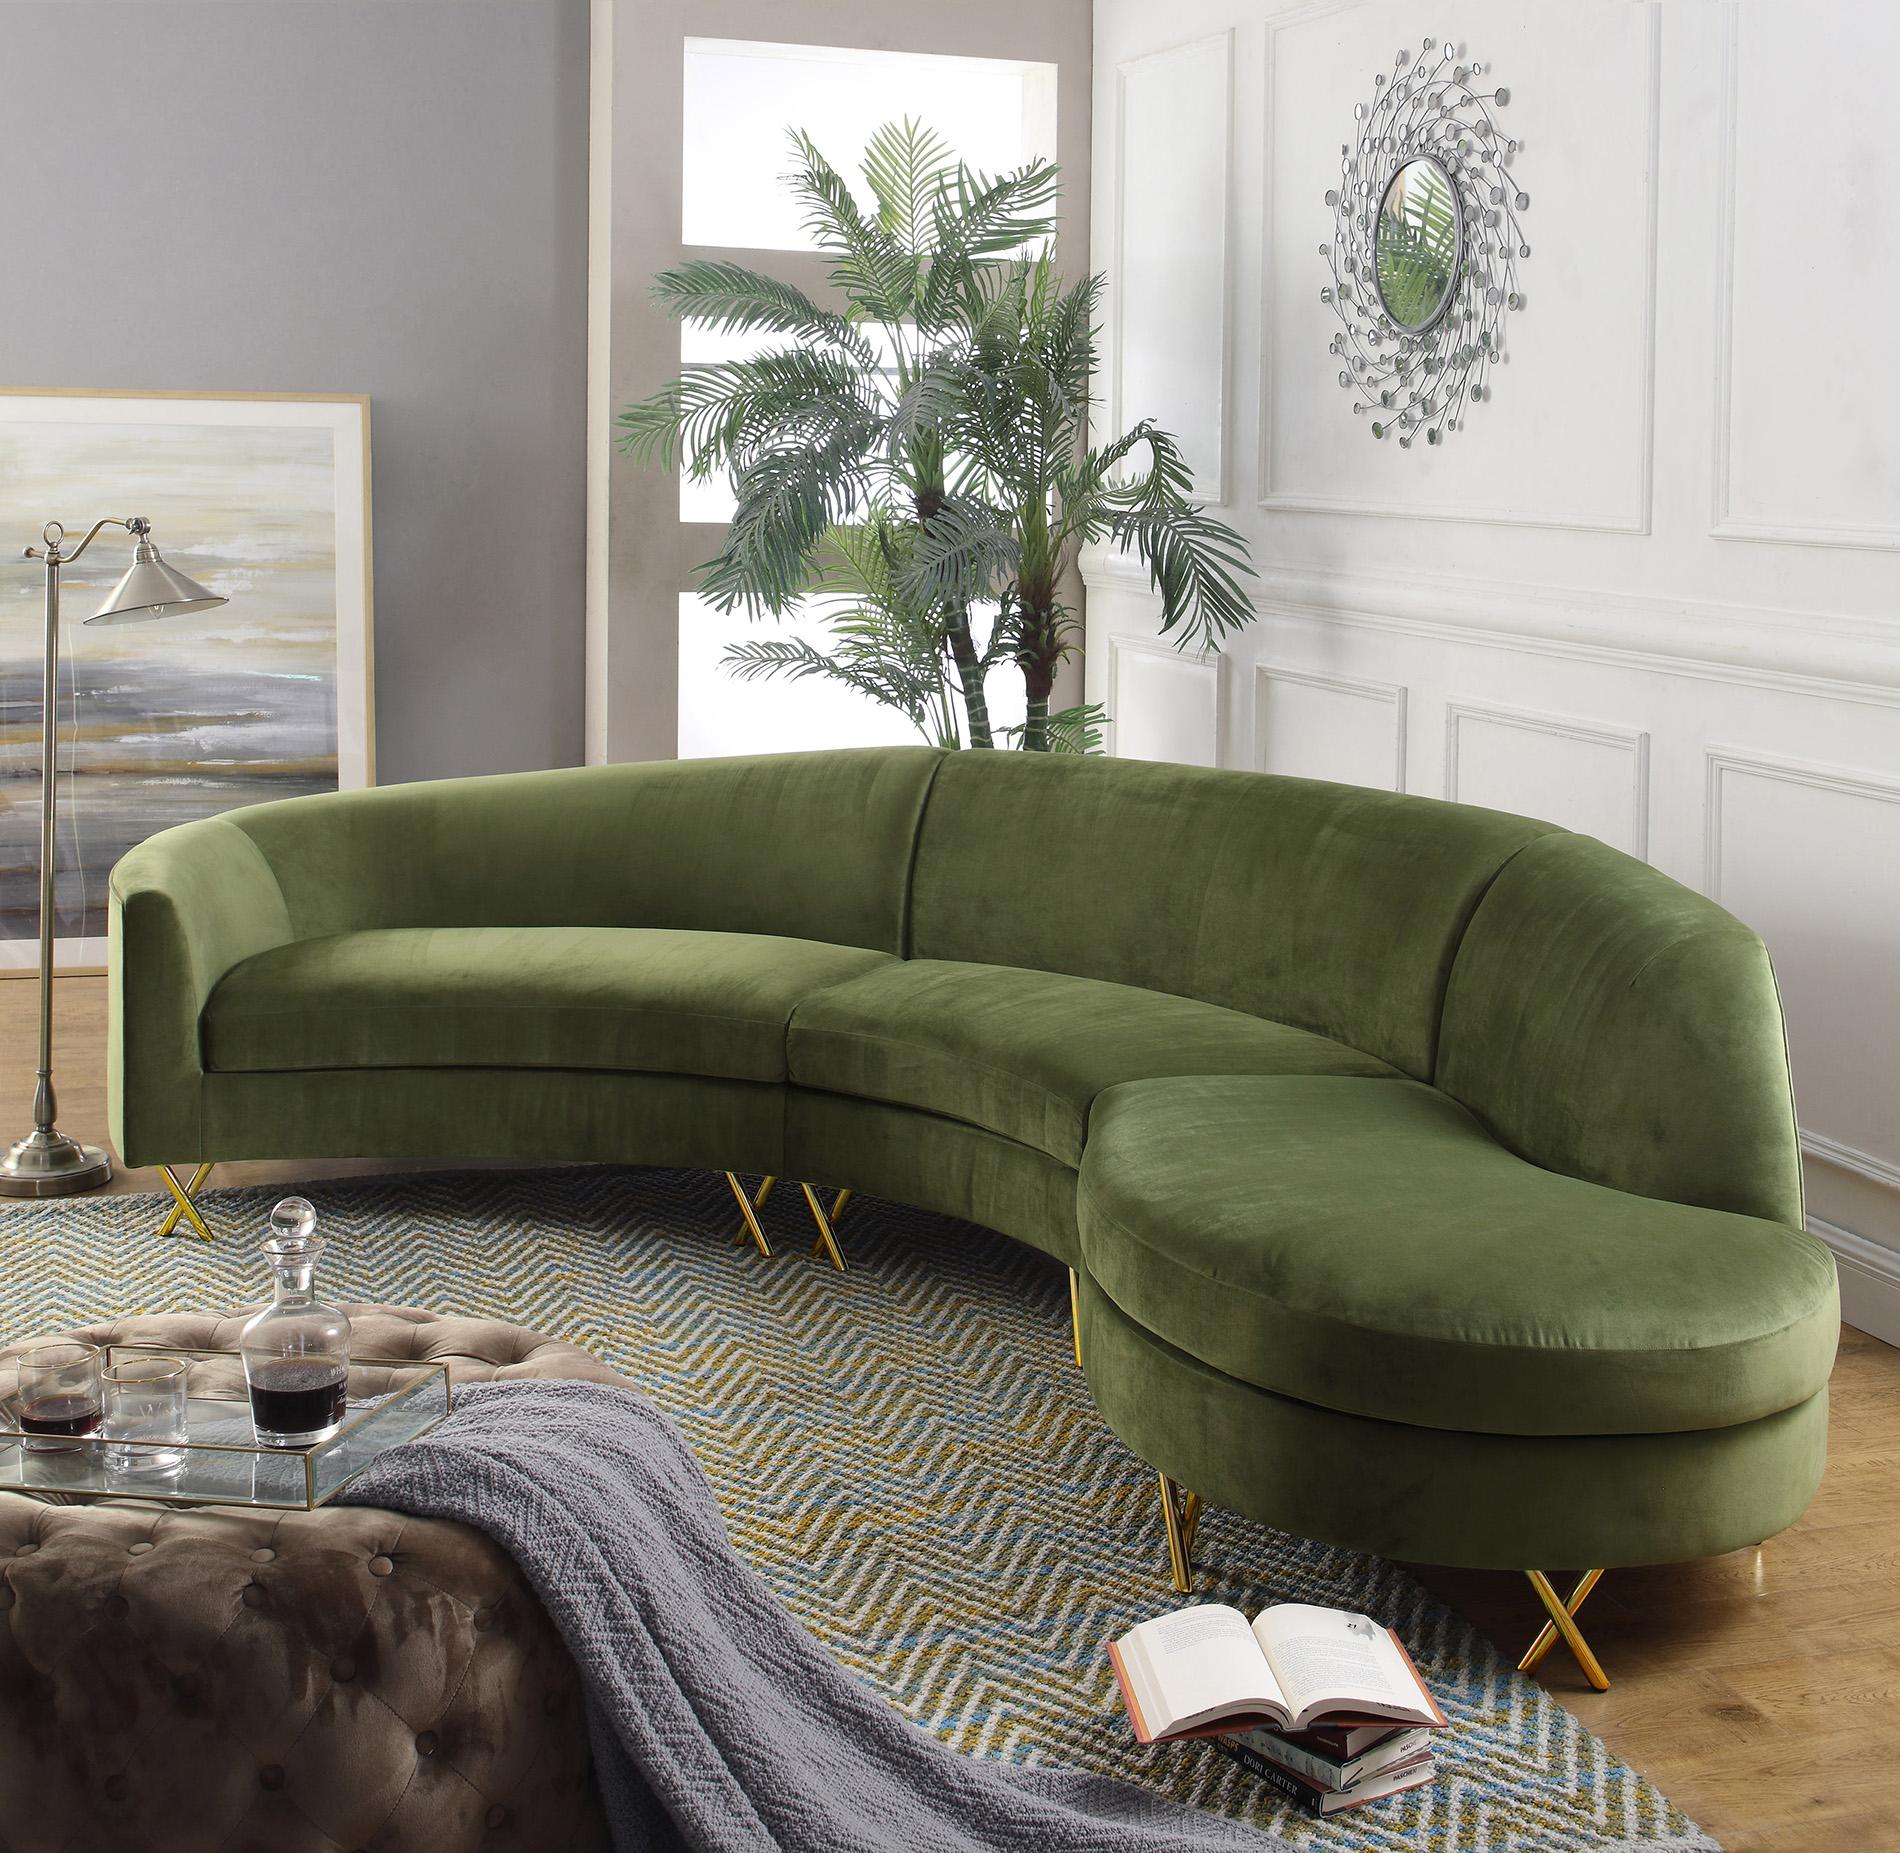 Contemporary, Modern Sectional Sofa SERPENTINE 671Olive 671Olive-Sectional in Green Velvet